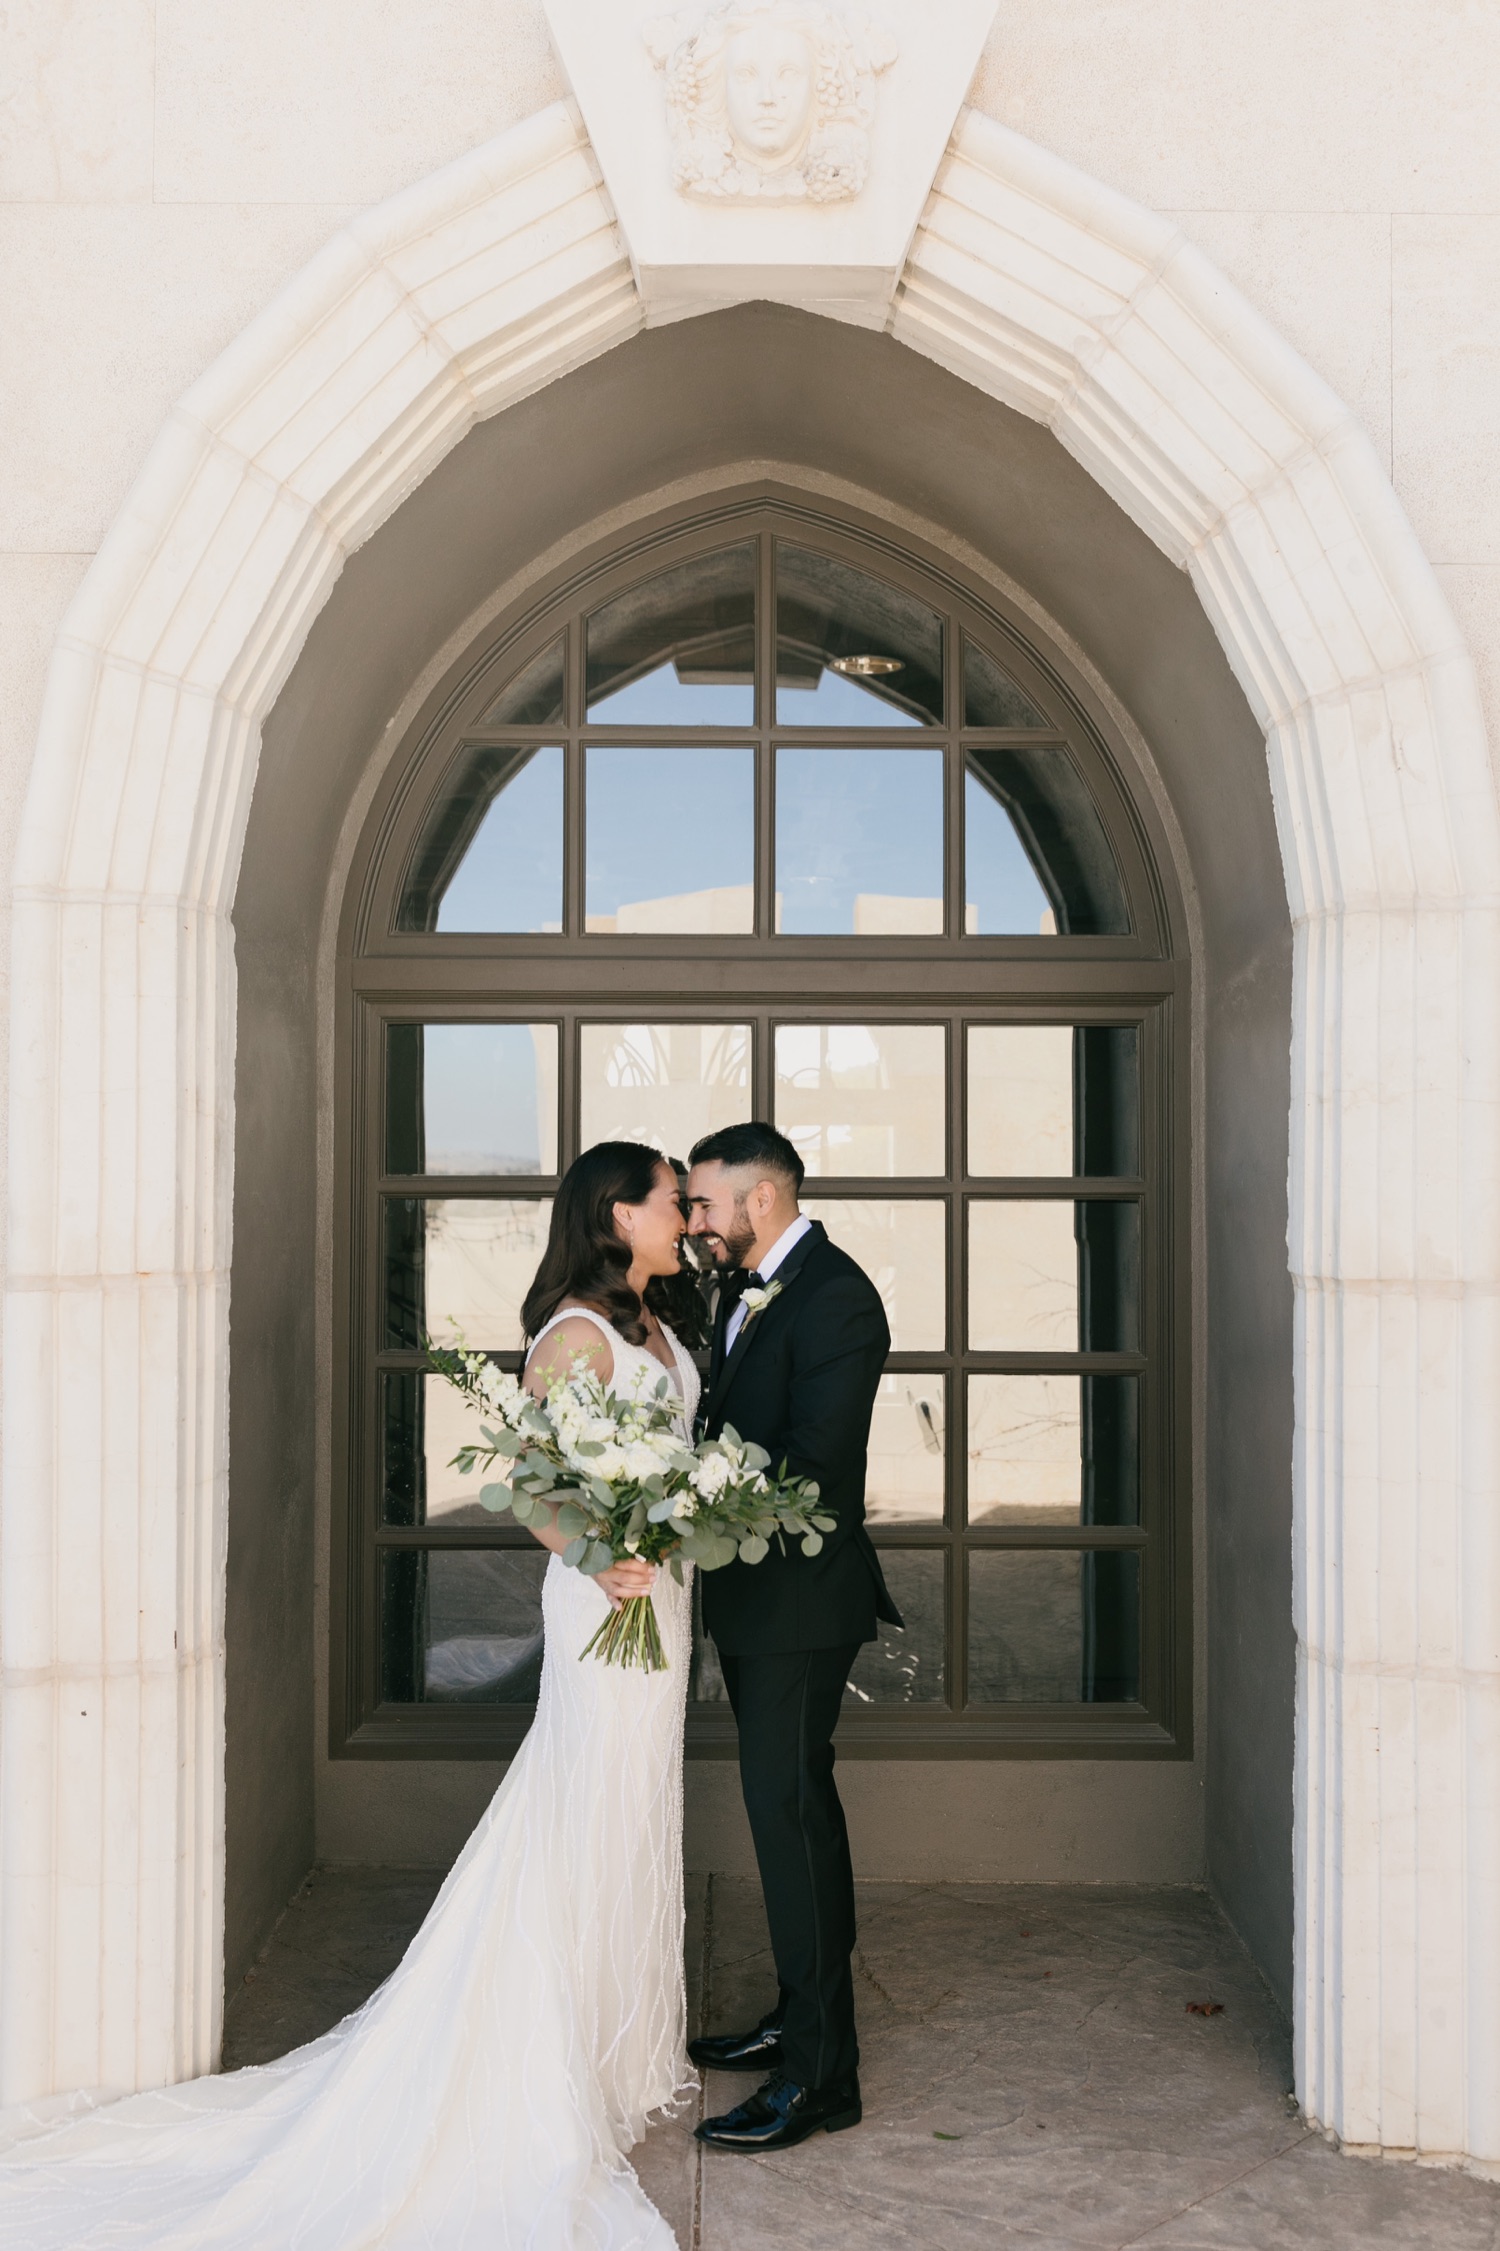 Bride and groom pose at Tooth and nail winery in paso robles, Ca by Tayler Enerle Photography